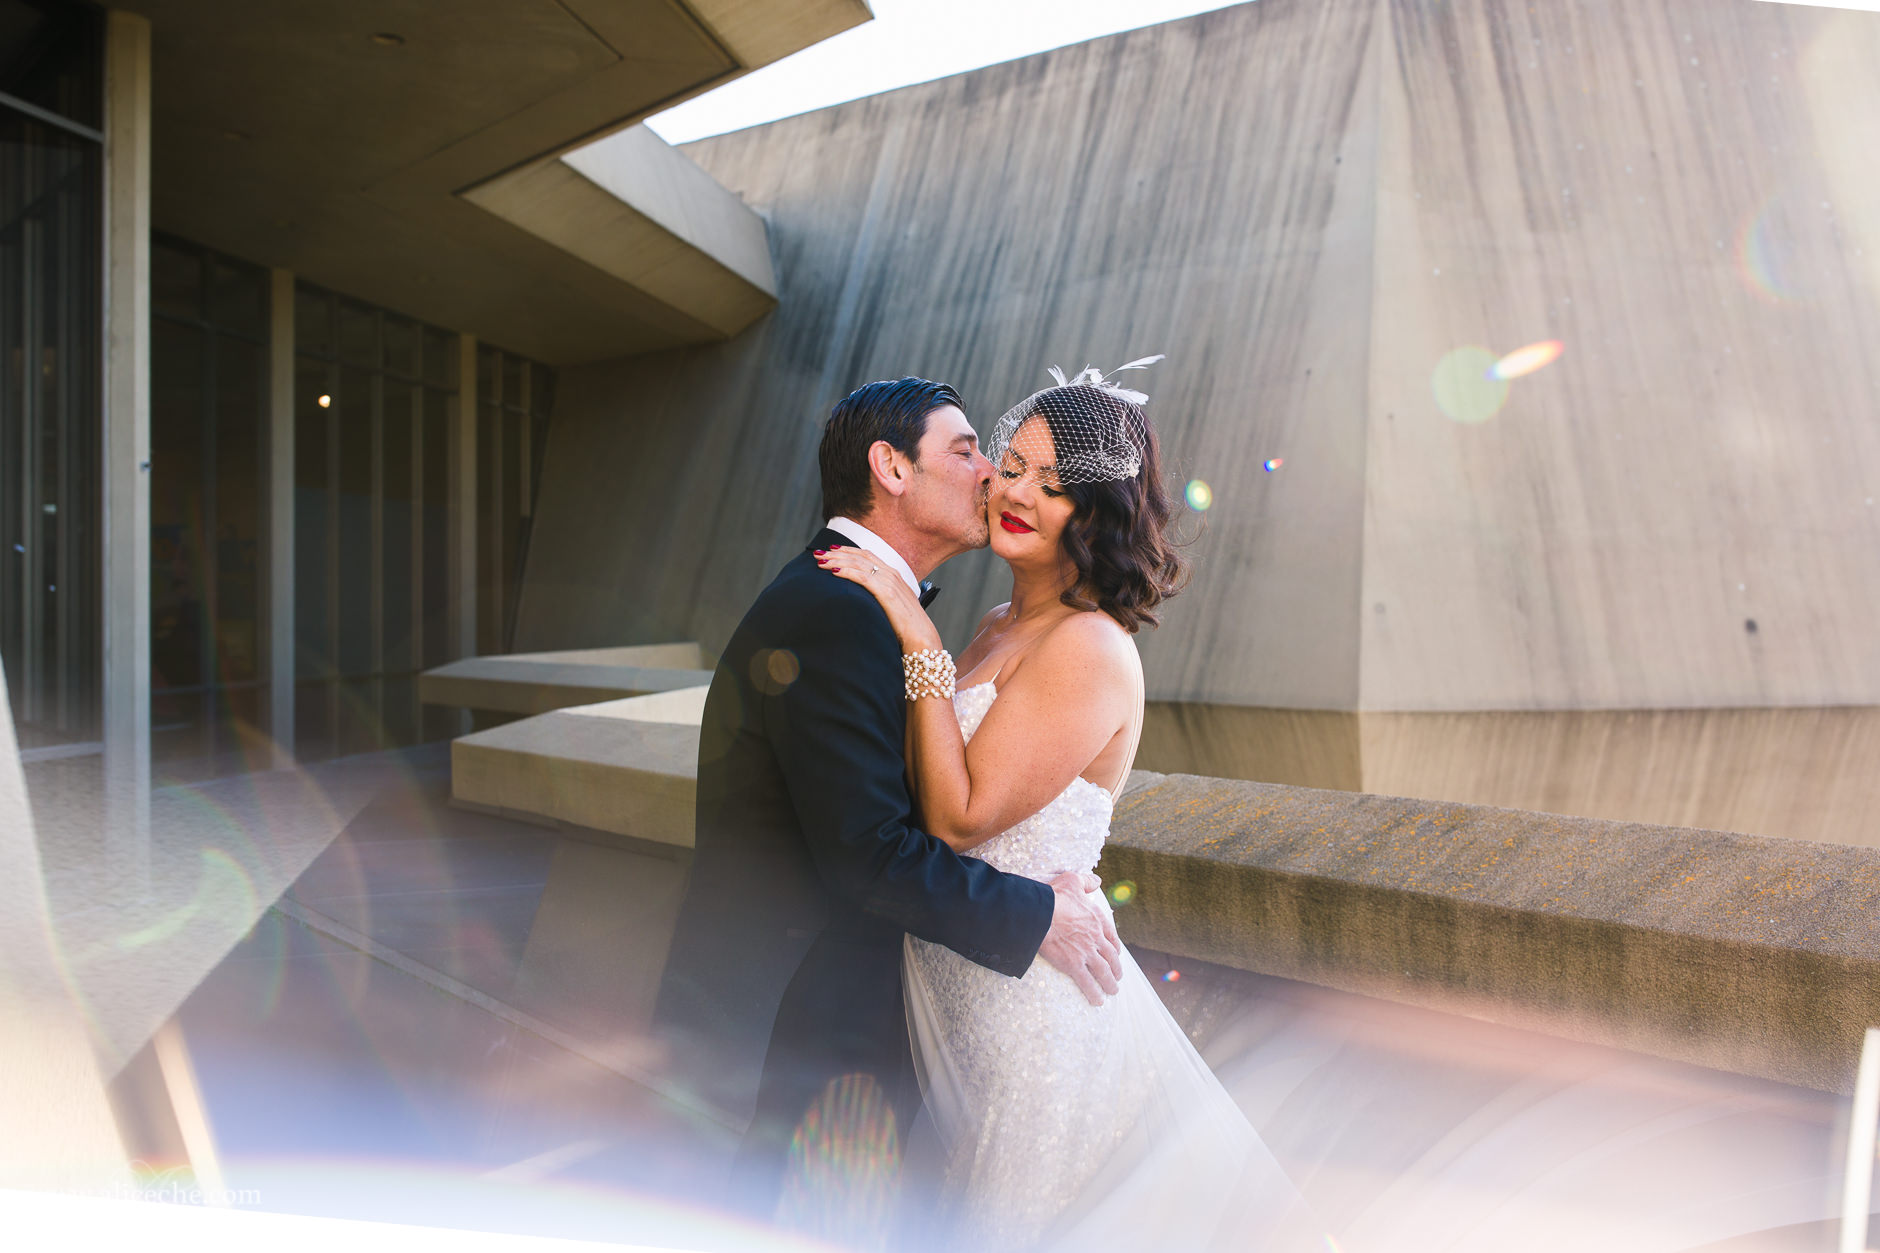 Groom kissing bride on cheek at Lawrence Hall of Science